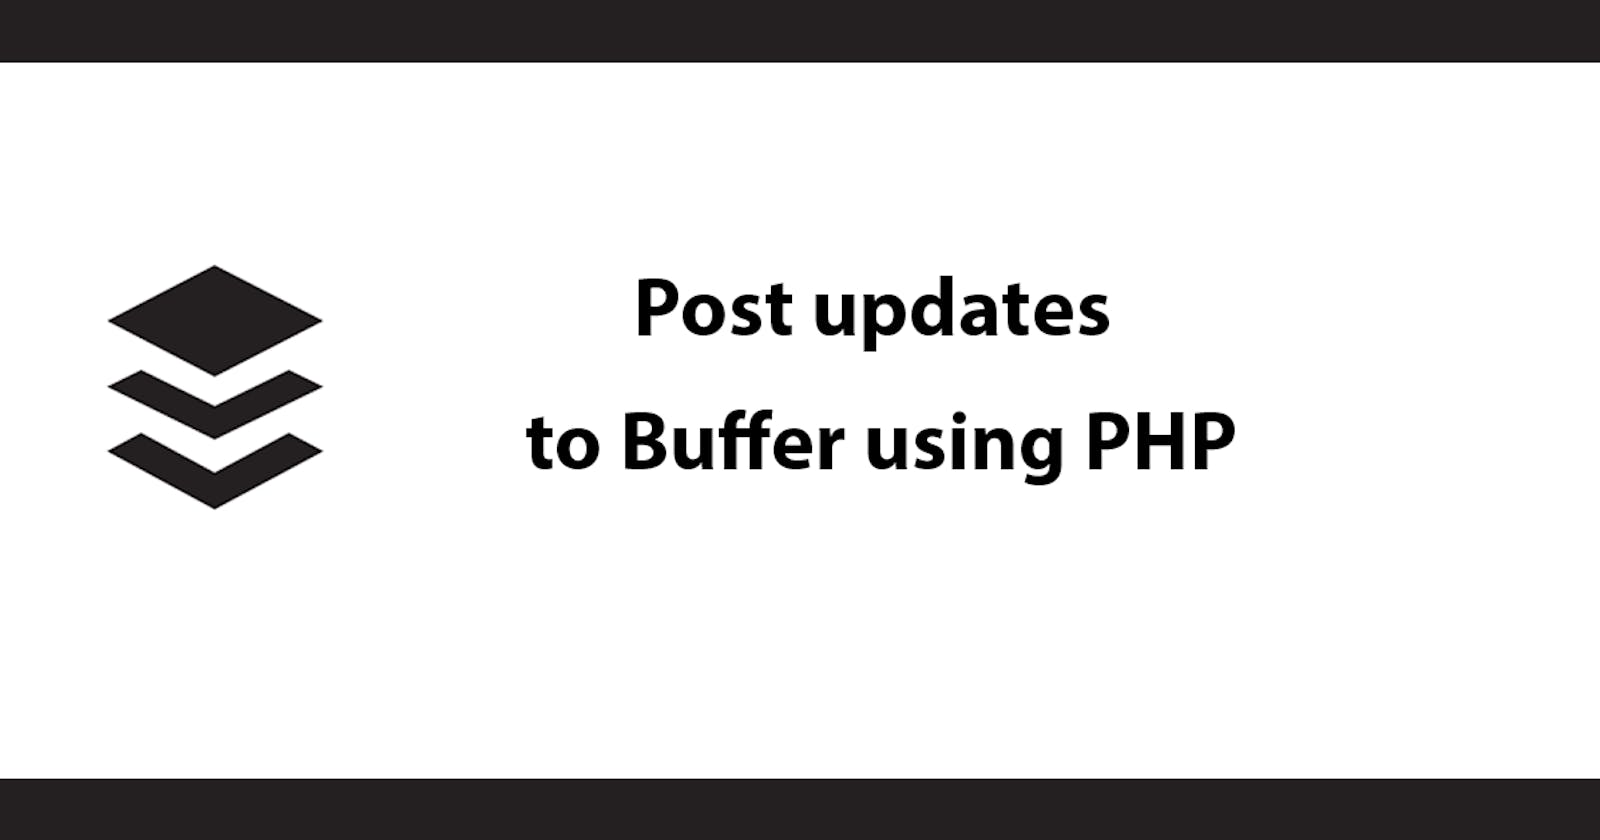 Post updates to Buffer using PHP